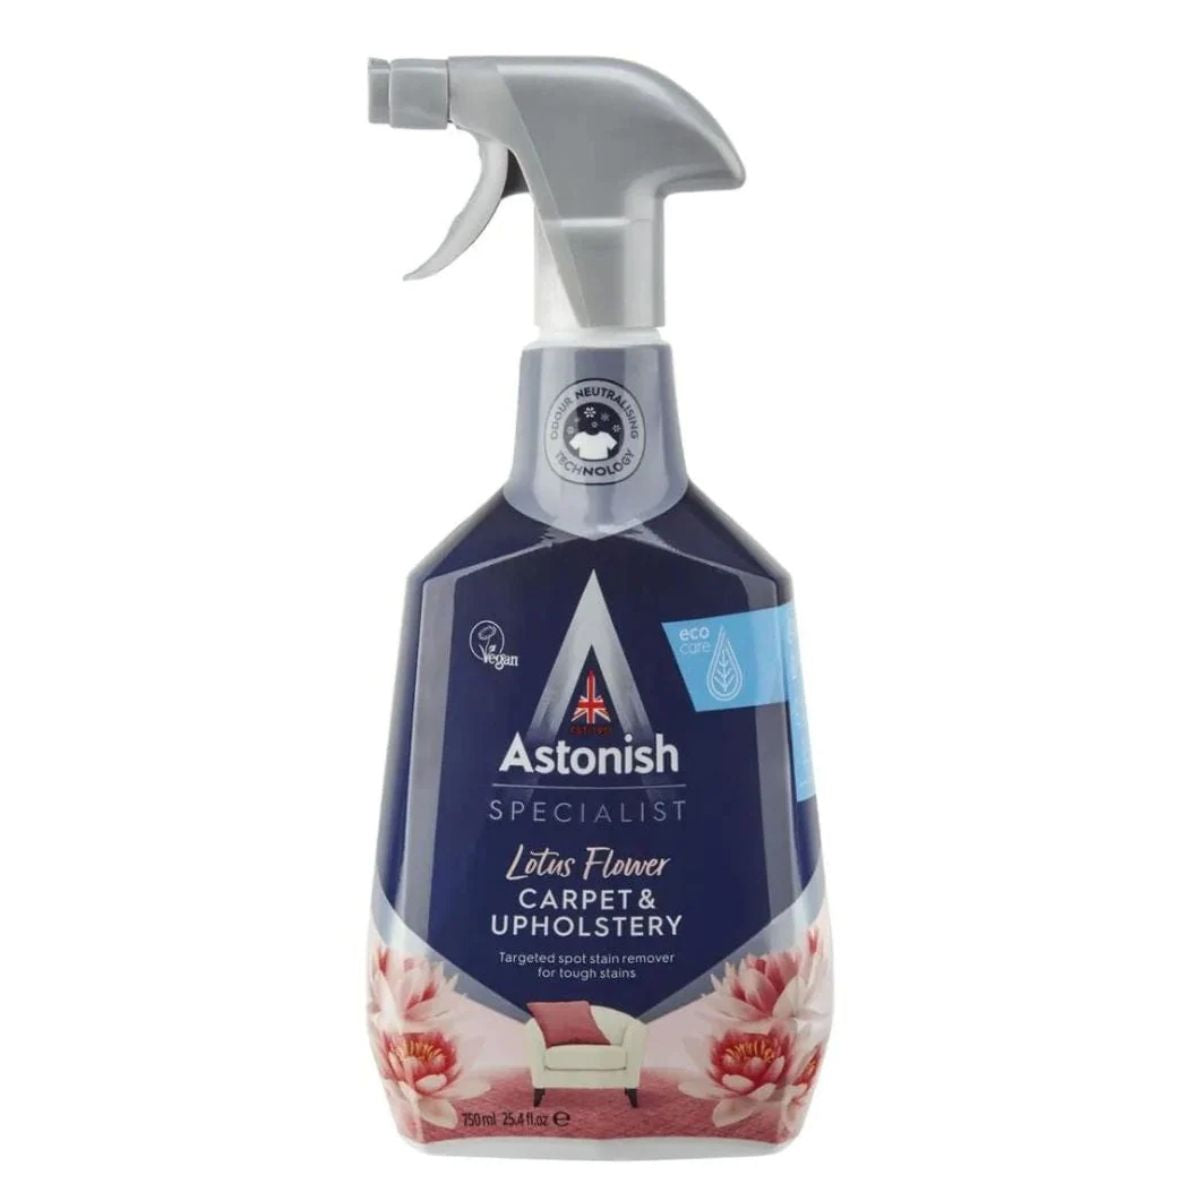 A Astonish - Carpet & Upholstery Spray Lotus Flowers - 750ml spray bottle with a white label.